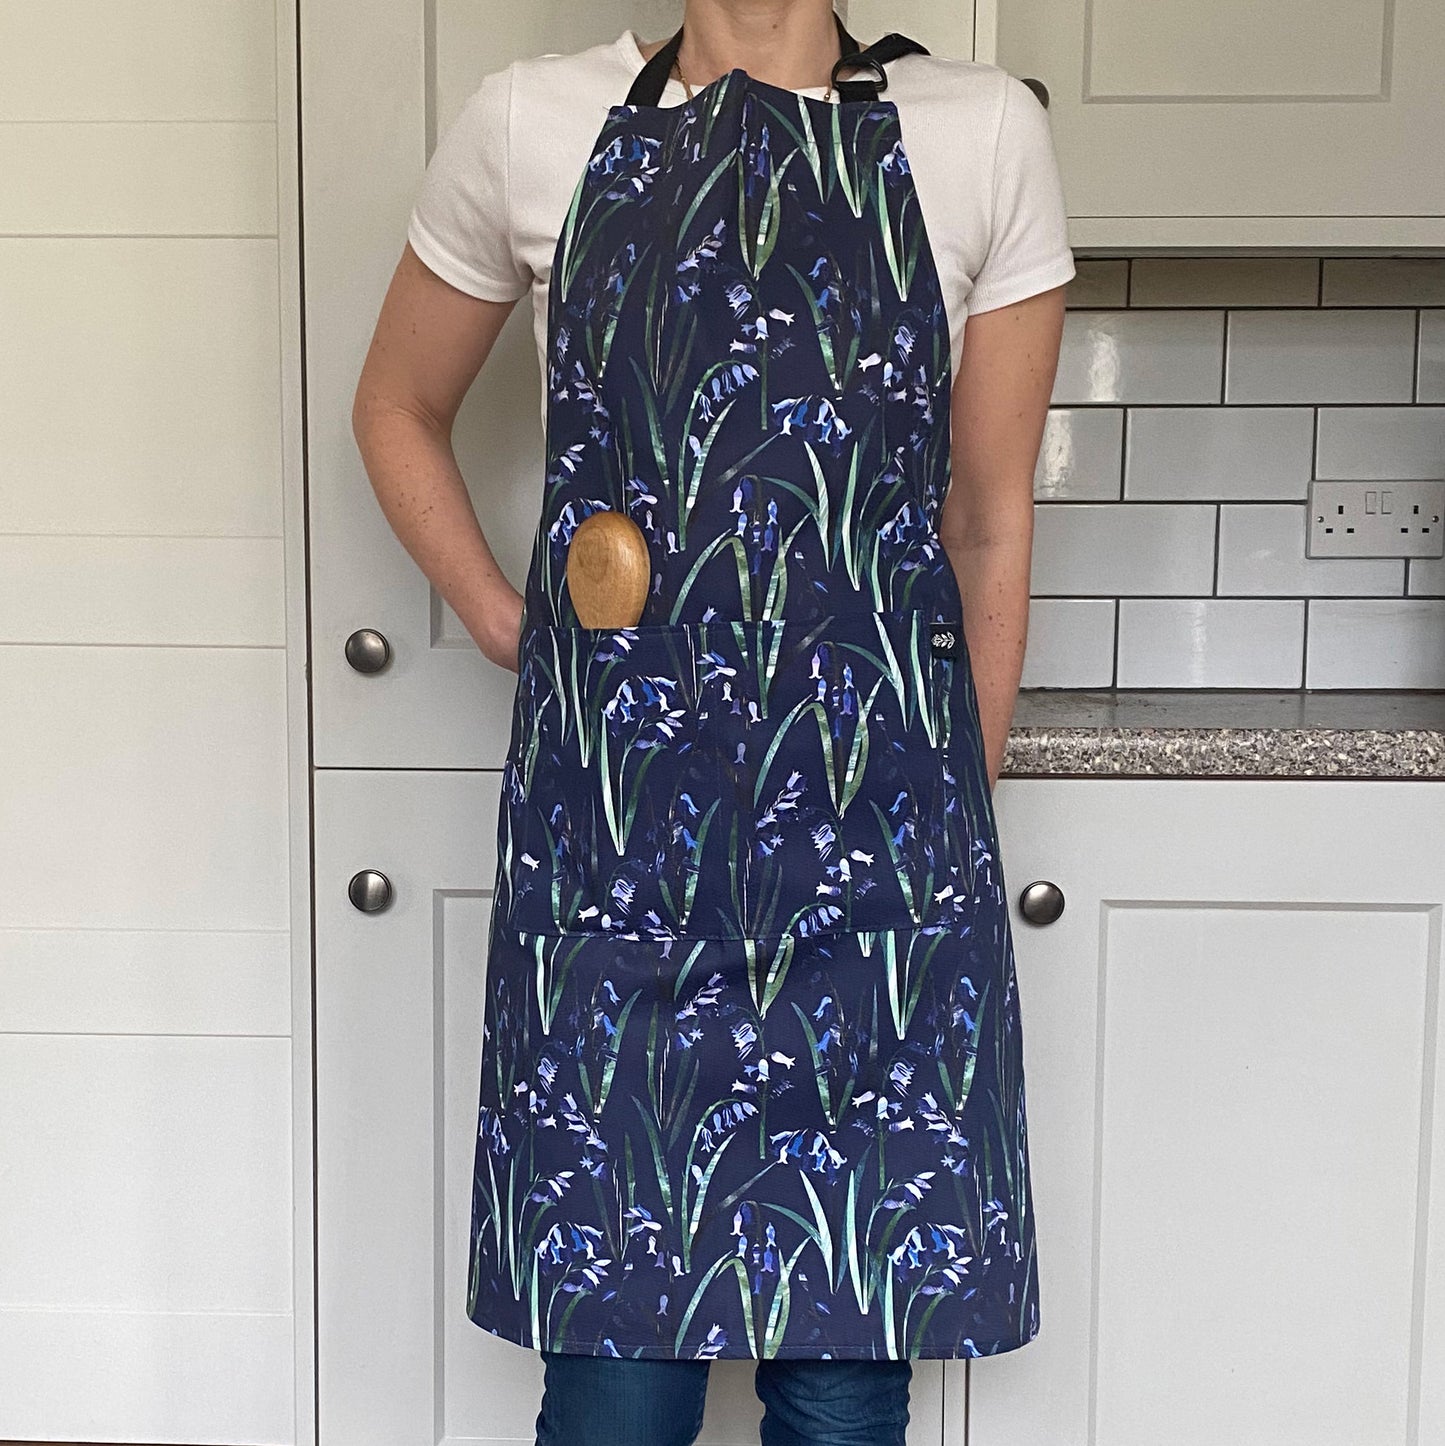 The Model wears the Navy Bluebell Apron, with two front pockets and adjustable neck strap.